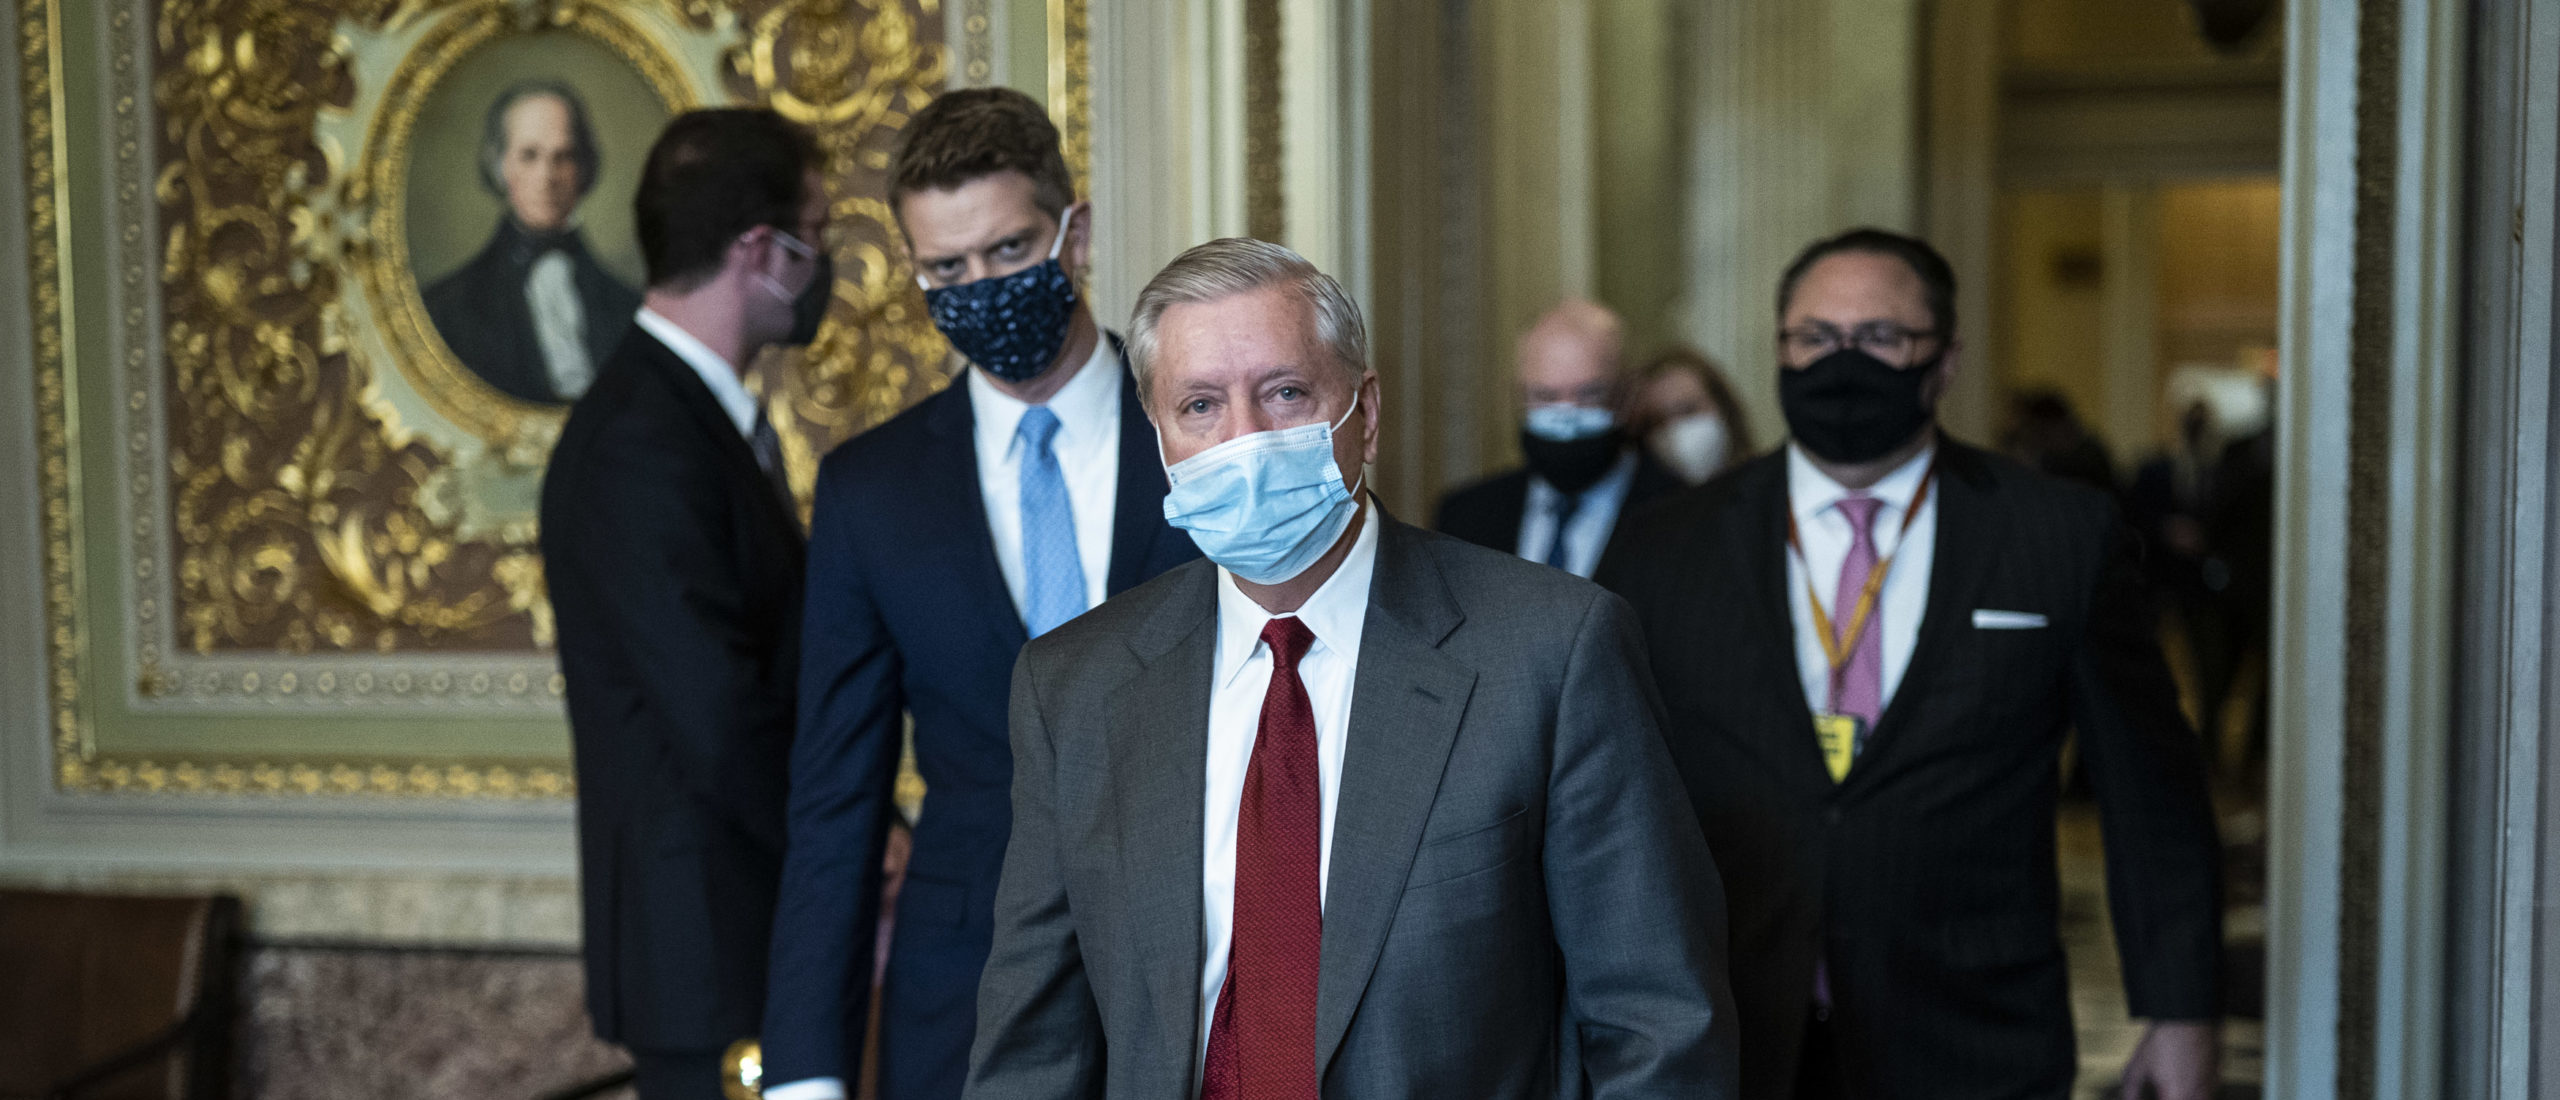 WASHINGTON, DC - FEBRUARY 12: Sen. Lindsey Graham (R-SC) walks with Jason Miller to a meeting room for former President Donald Trump's defense lawyers on the fourth day of the Senate Impeachment trials for Trump on Capitol Hill on February 12, 2021 in Washington, DC. (Photo by Jabin Botsford - Pool/Getty Images)